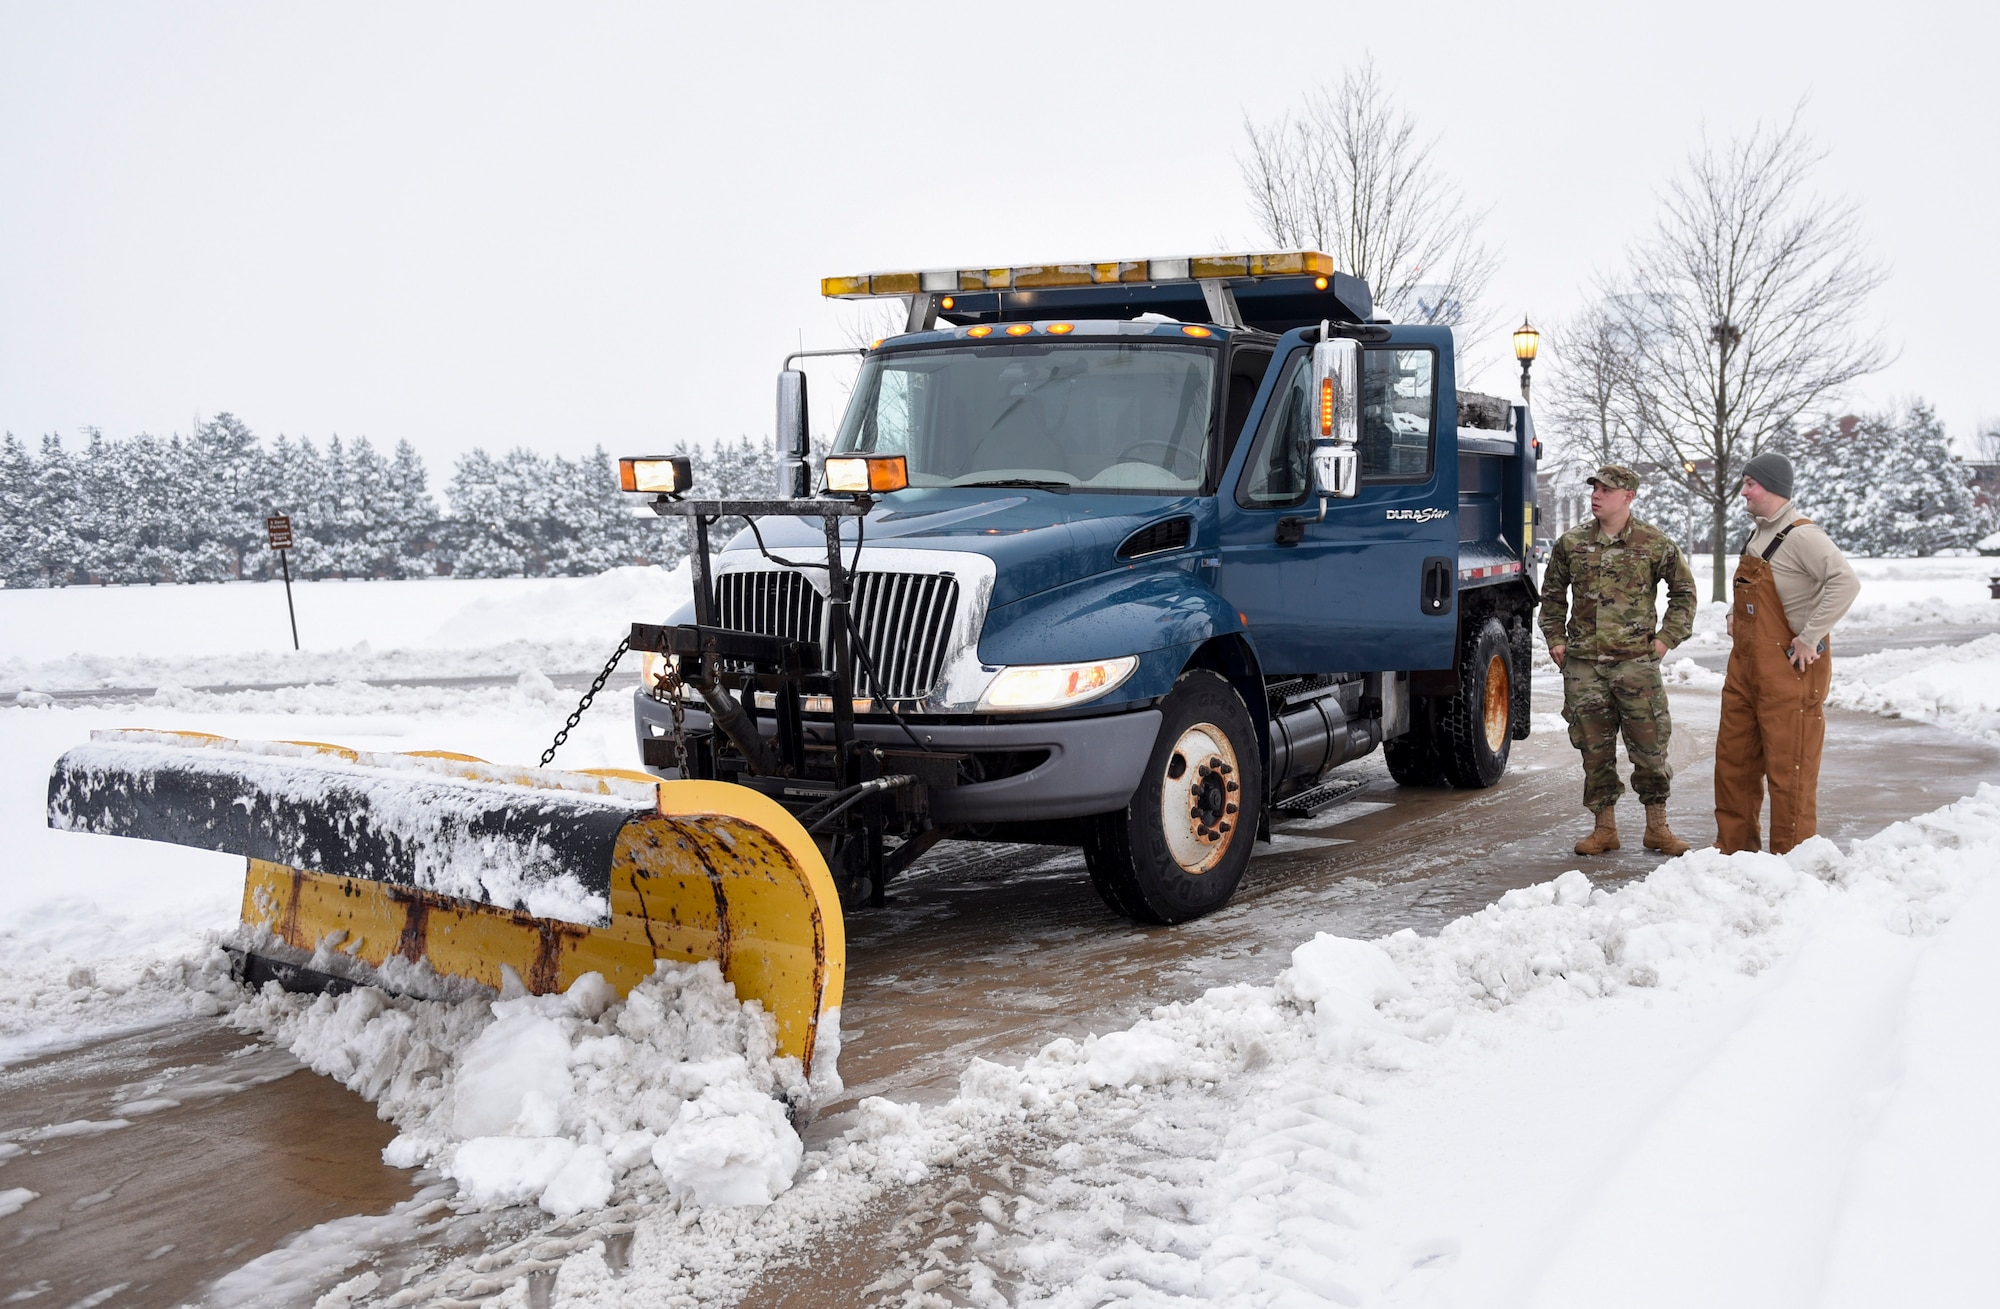 Senior Airman Caleb Lyons, 375th Civil Engineer Squadron water and fuels system maintenance, speaks with Staff Sgt. Justin Henke, 375th CES electrical systems journeyman about clearing the roads  Jan. 12, 2019, after heavy snowfall hit Scott Air Force Base, Illinois. The initial road clearing process takes about three hours but must be continued for as long as the snow is falling to ensure people stay safe.